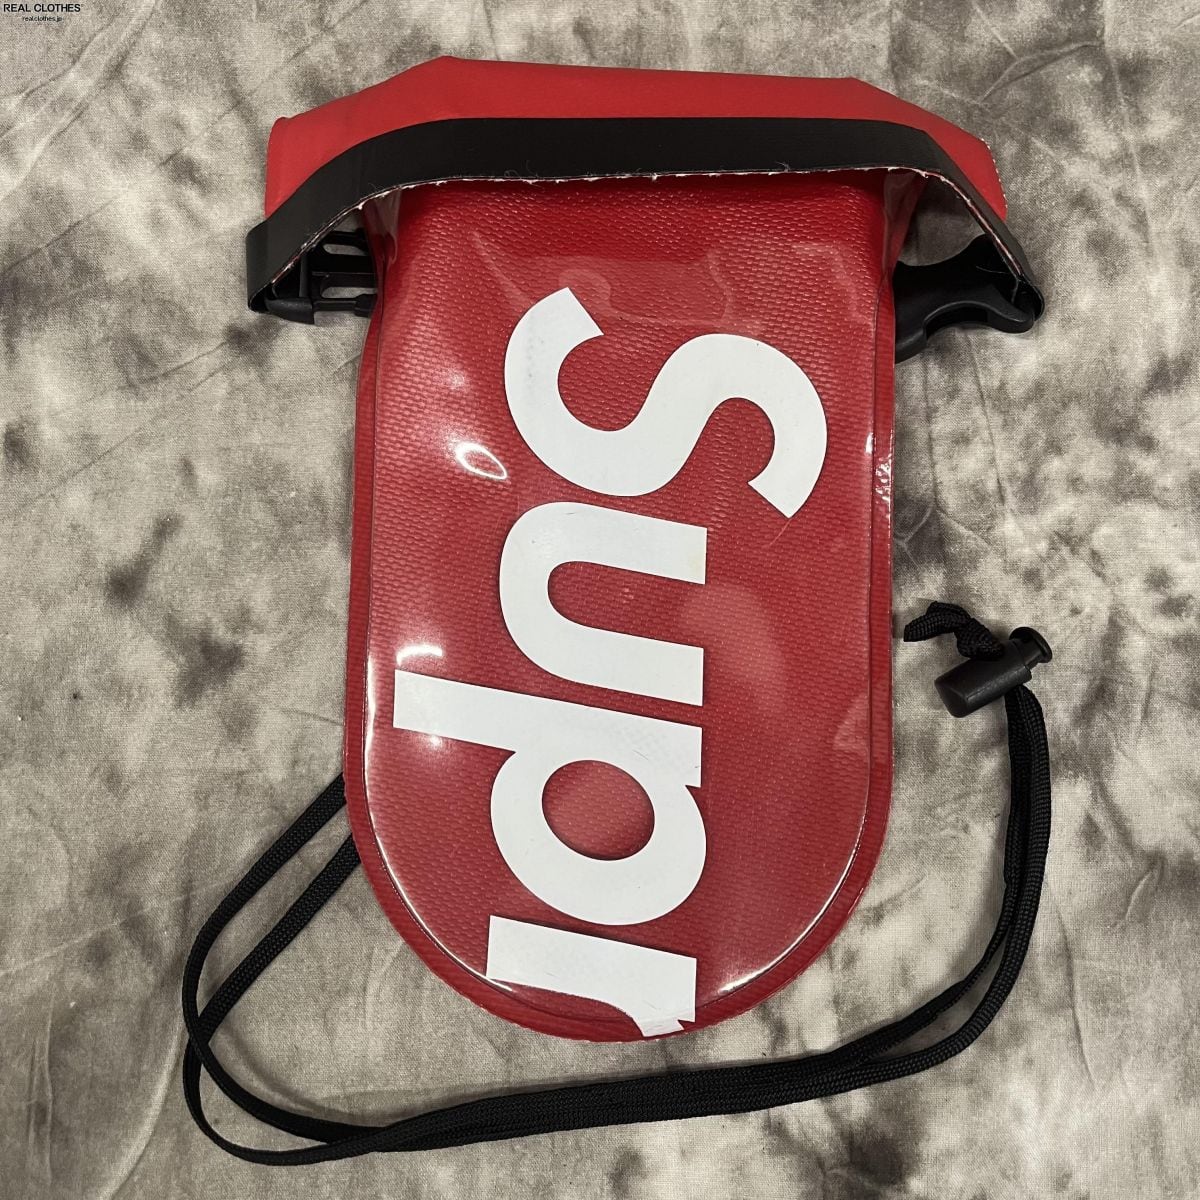 supreme sealline see pouch small redファッション小物 - その他